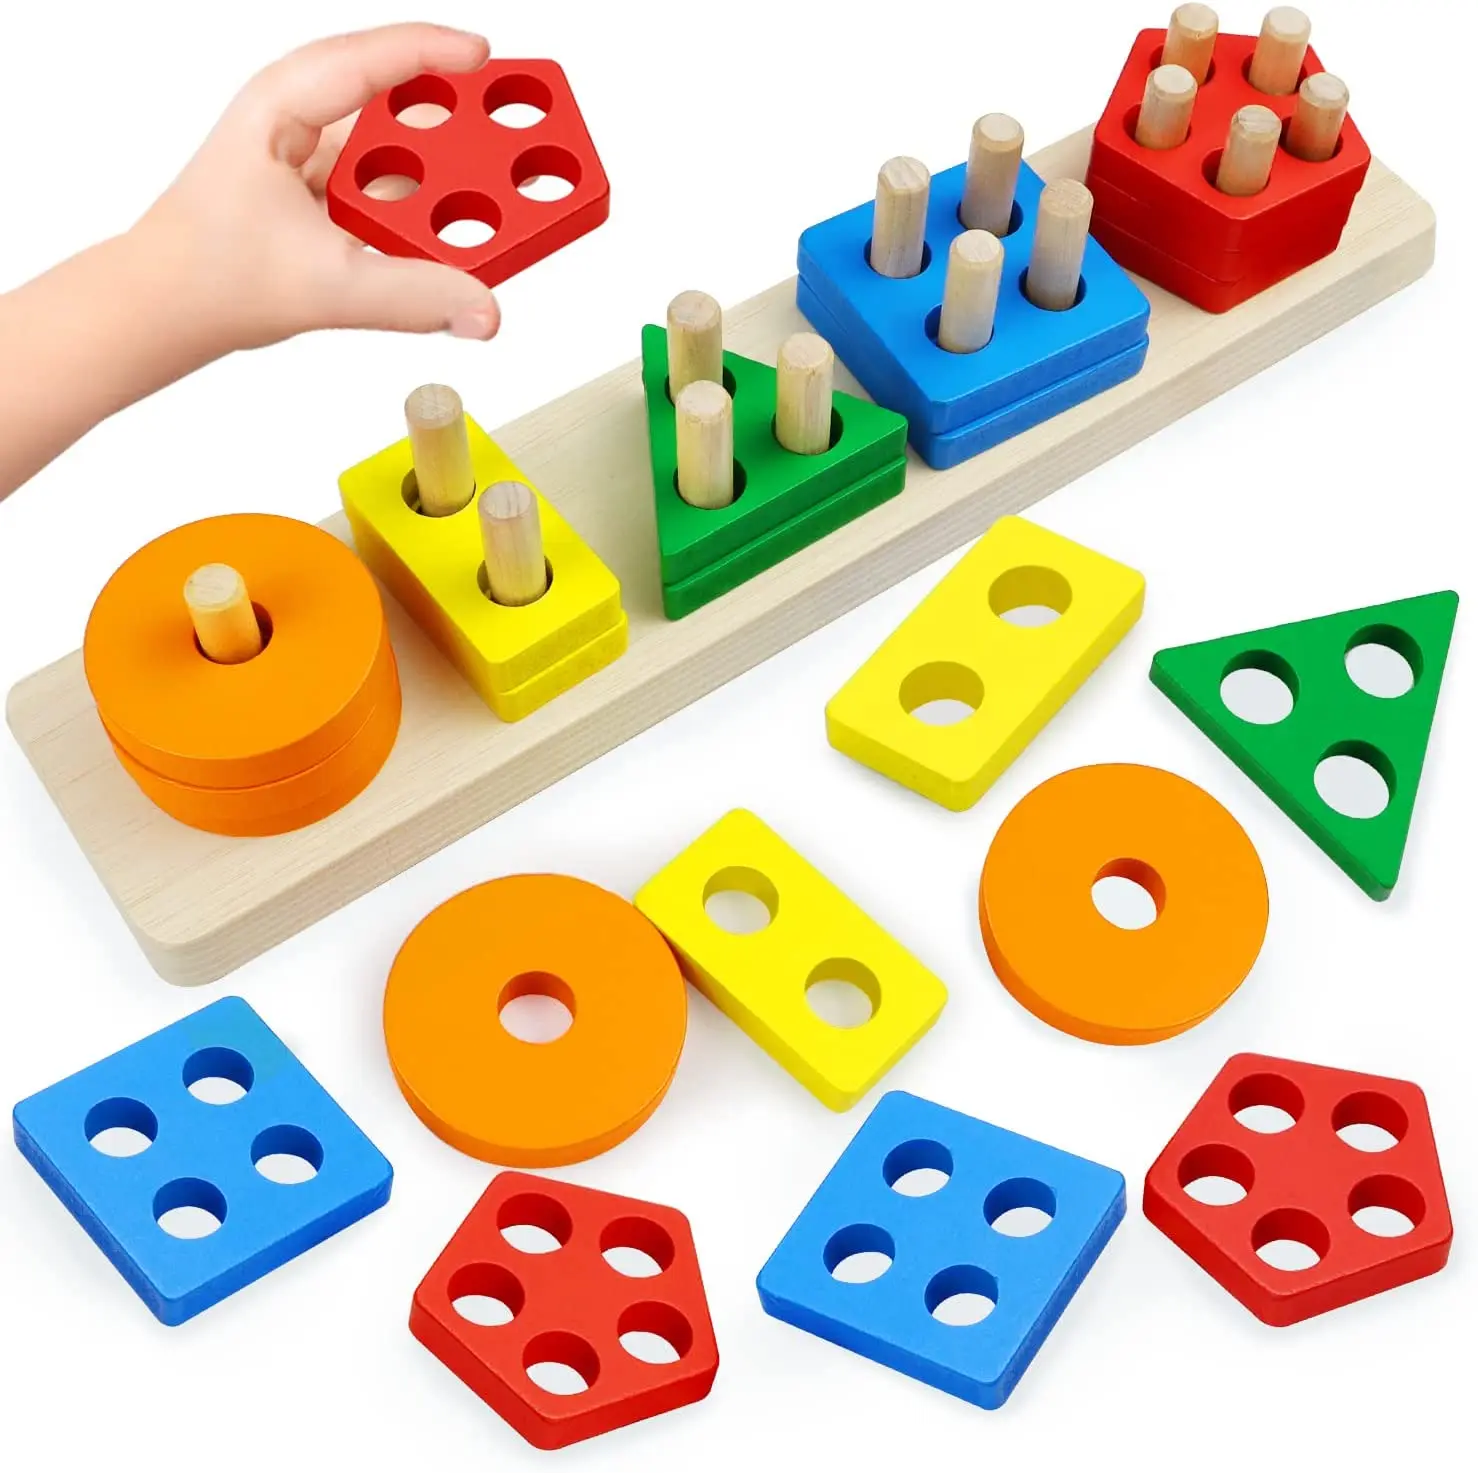 

Montessori Toys for Toddlers Wooden Sorting Stacking Toys for Kids Educational Toys Color Recognition Stacker Shape Sorter